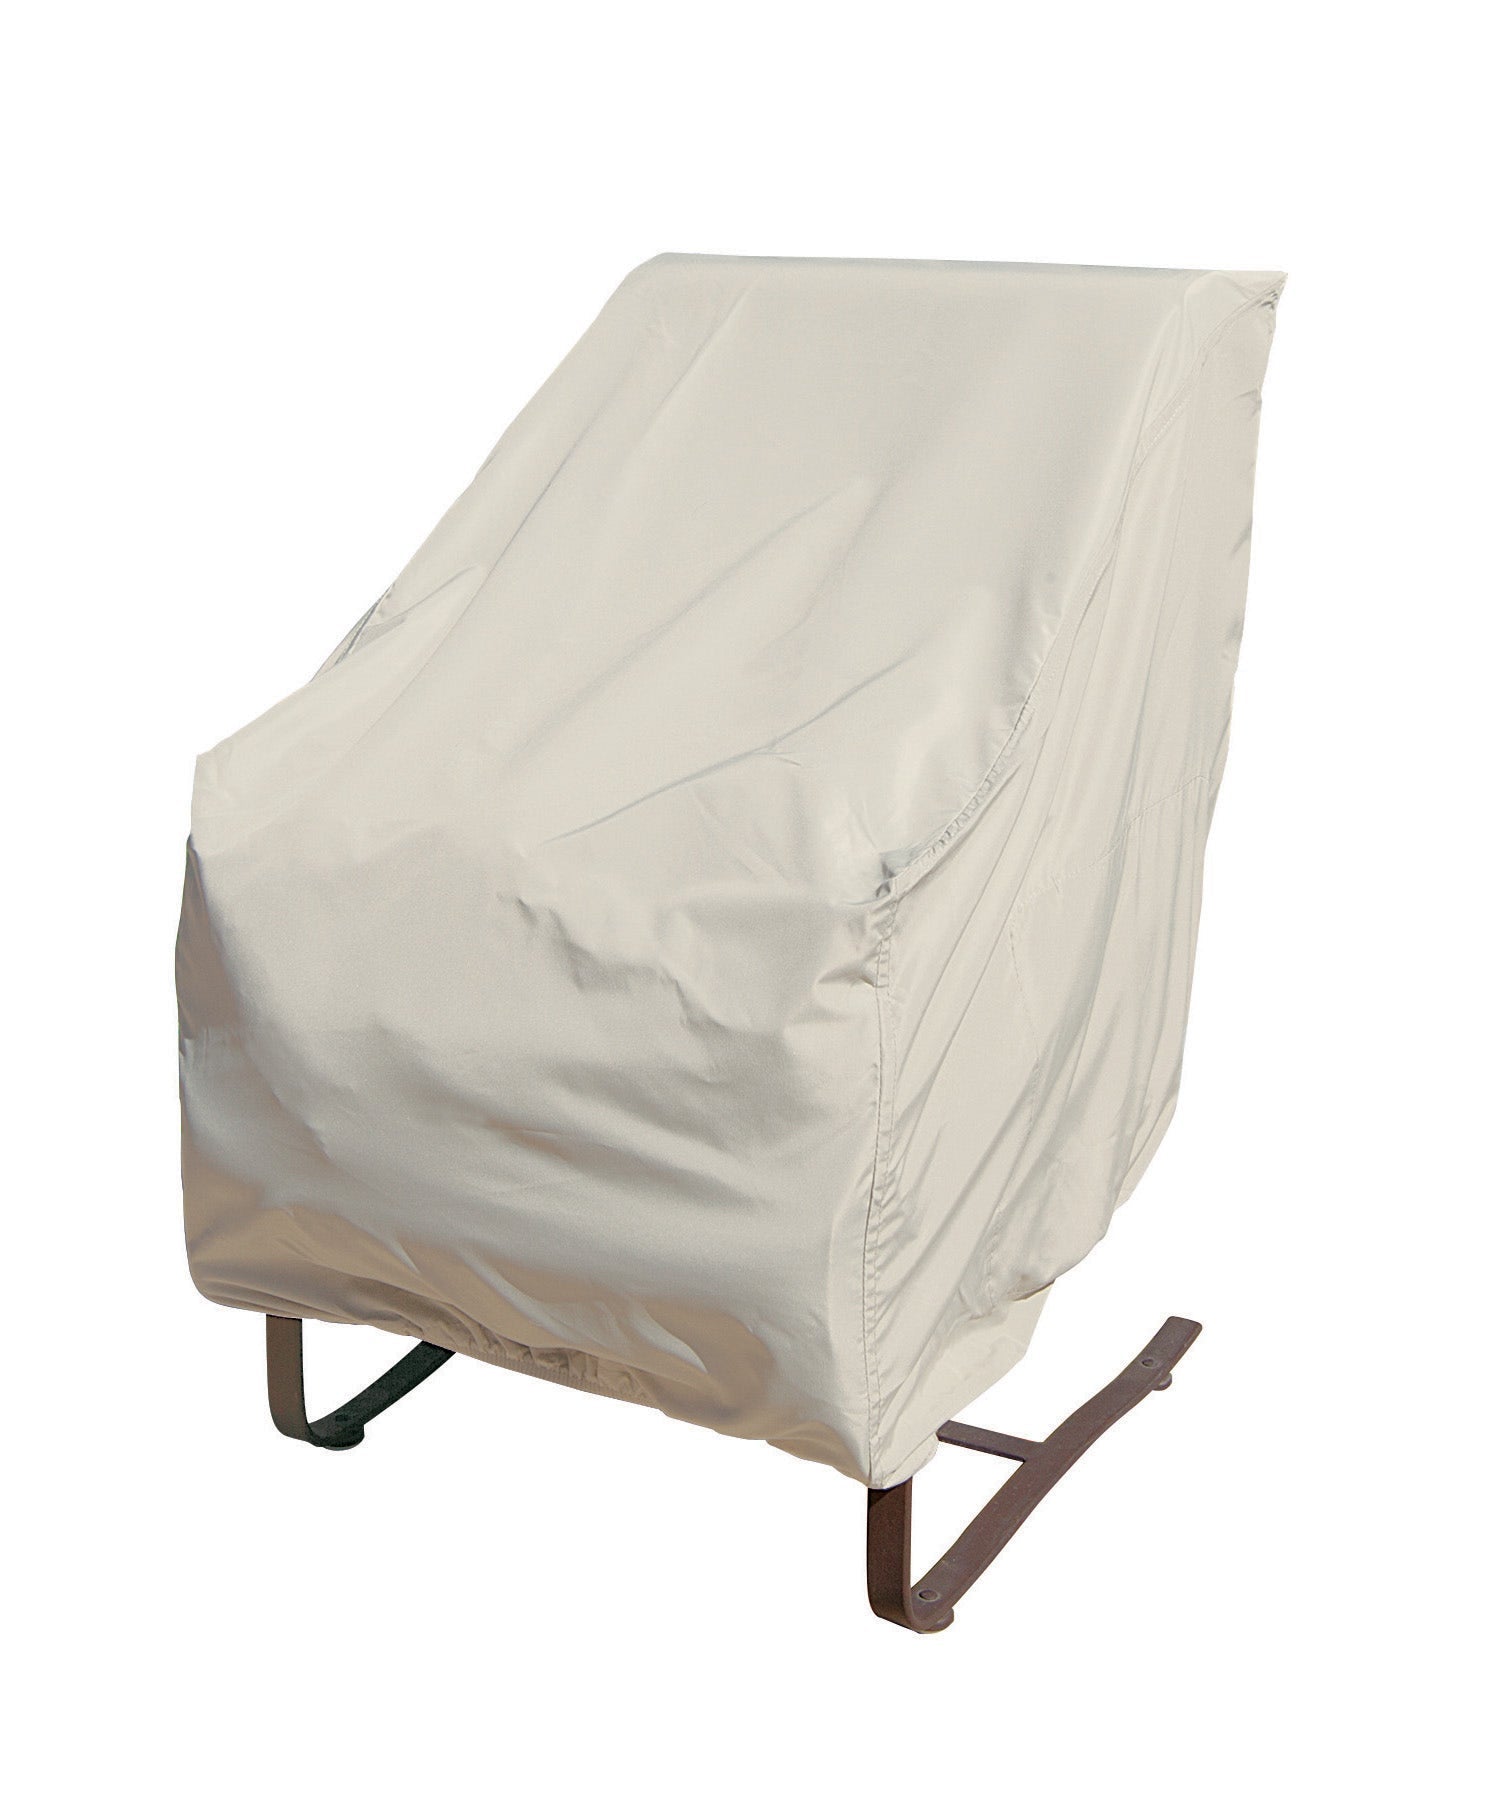 Treasure Garden Protective Cover for Dining Chair Outdoor Furniture Covers 12031212